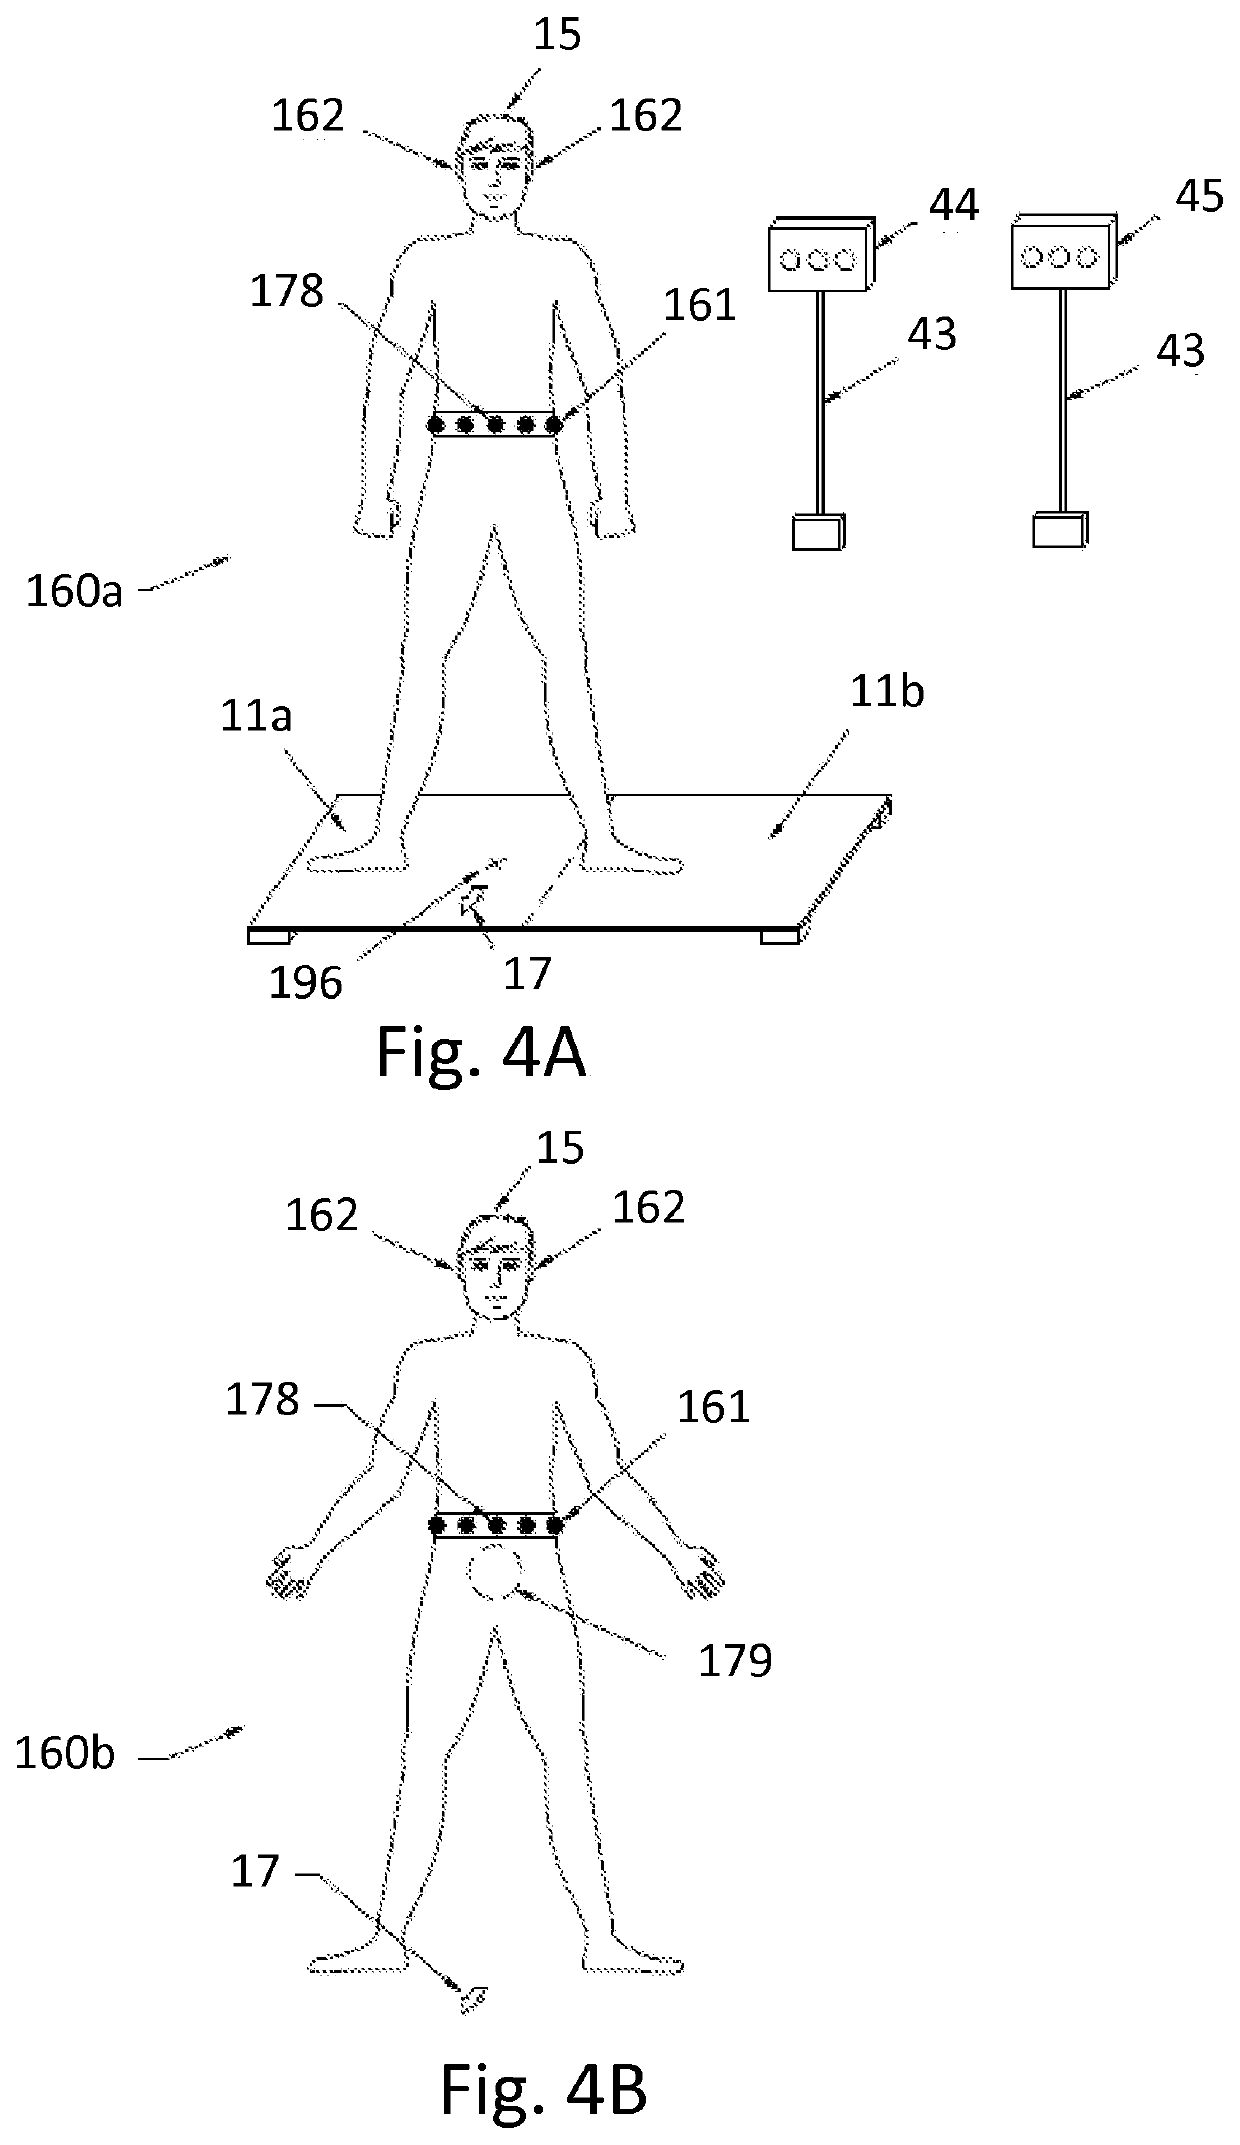 Multimodal sensory feedback system and method for treatment and assessment of disequilibrium, balance and motion disorders